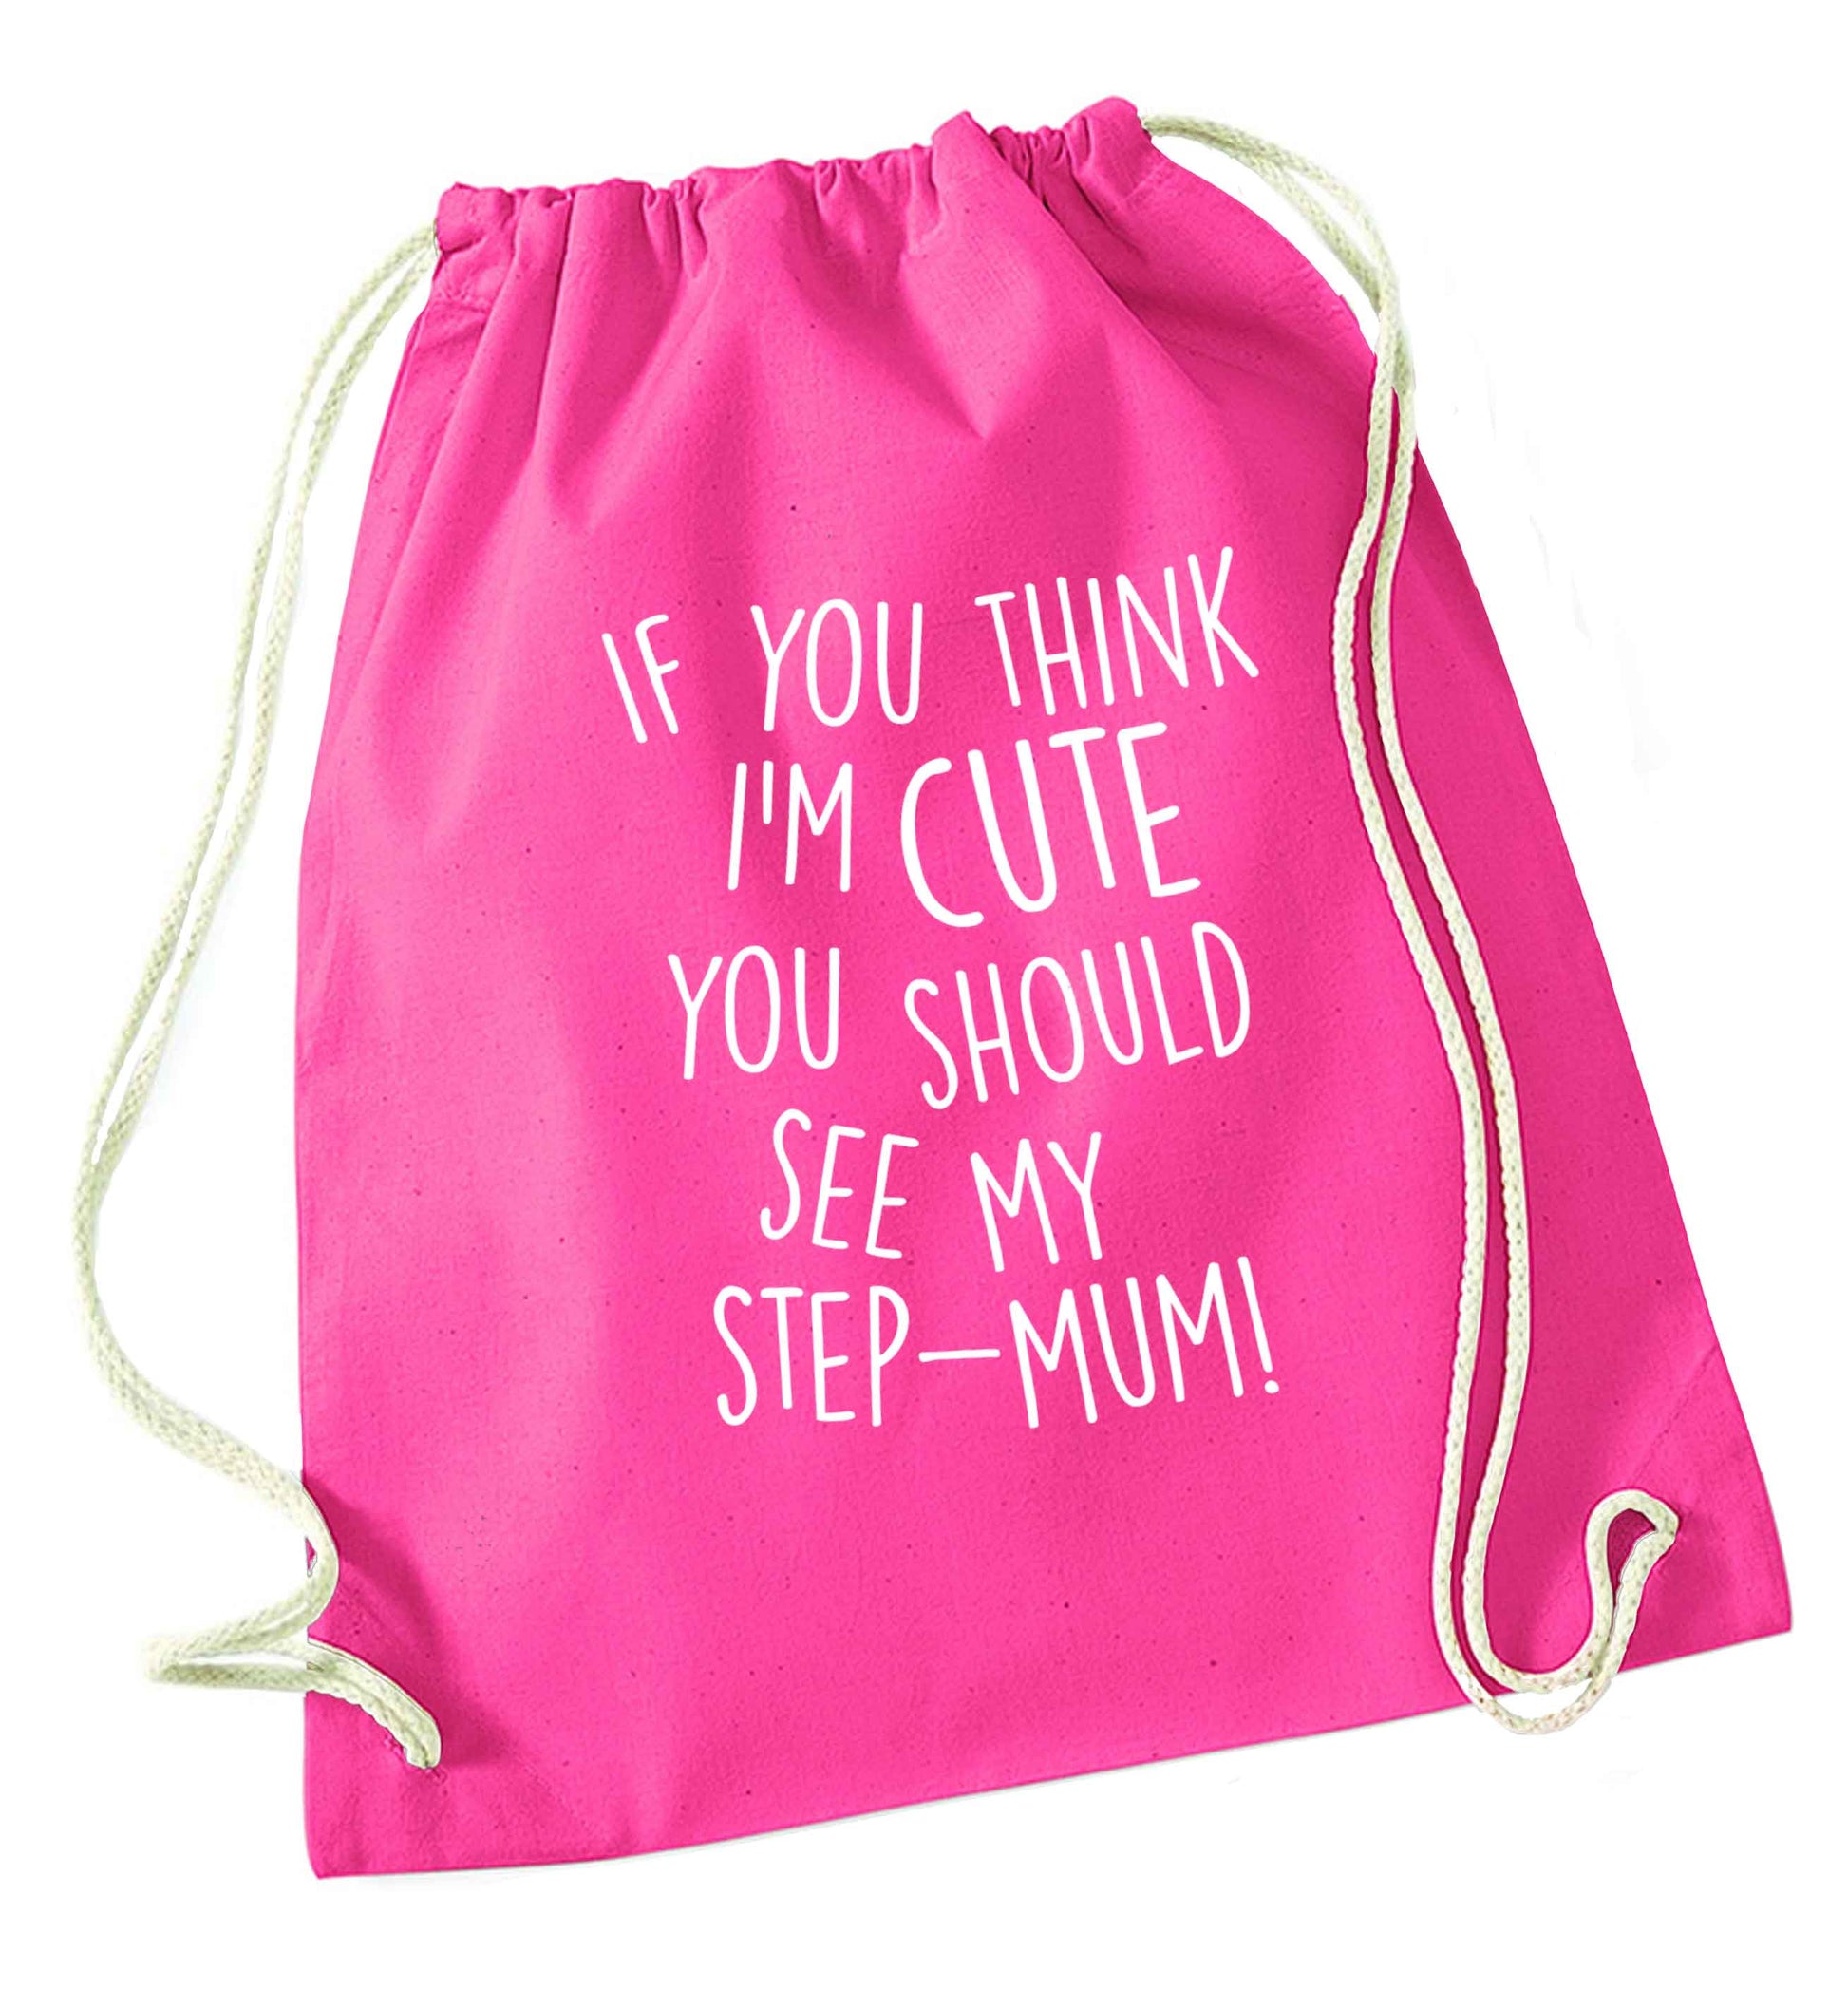 My step-mum loves me to the moon and back pink drawstring bag